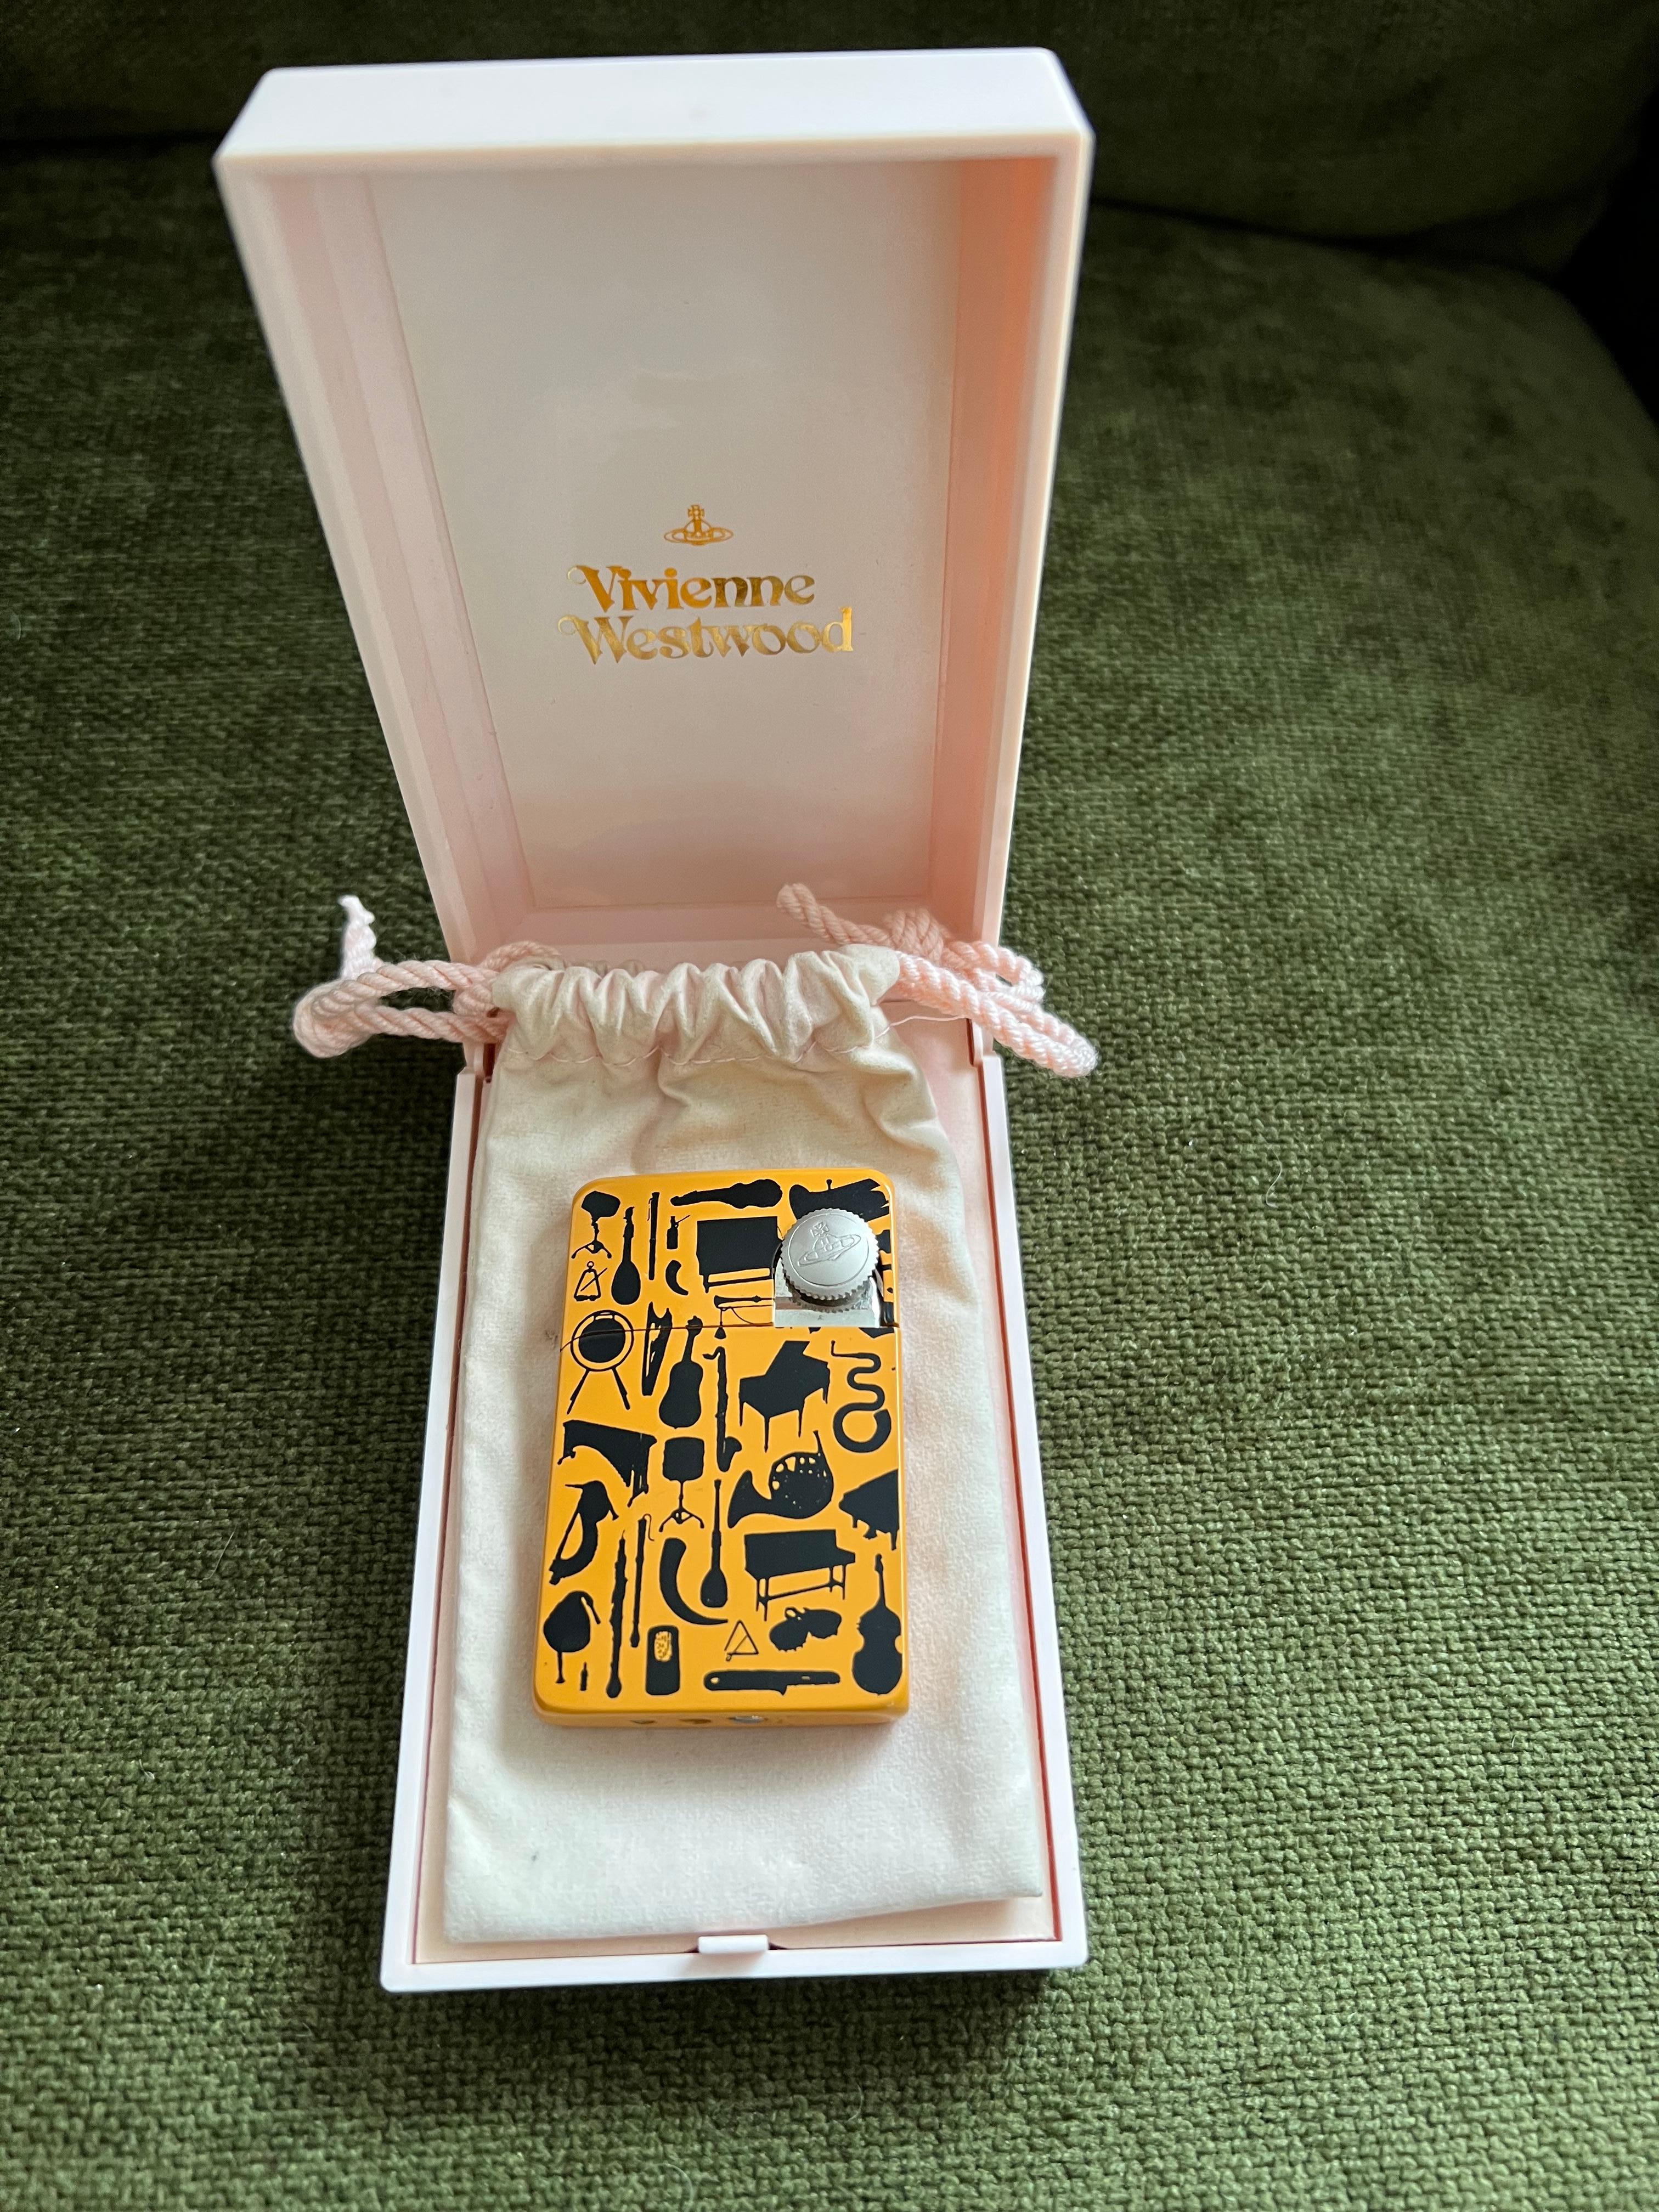 “Vivienne Westwood” Enamel Gas Lighter
Westwood has carried her rebellious spirit into her collections throughout her career, often combining punk symbolism with traditional feminine themes, and she's now considered one of the greatest architects of